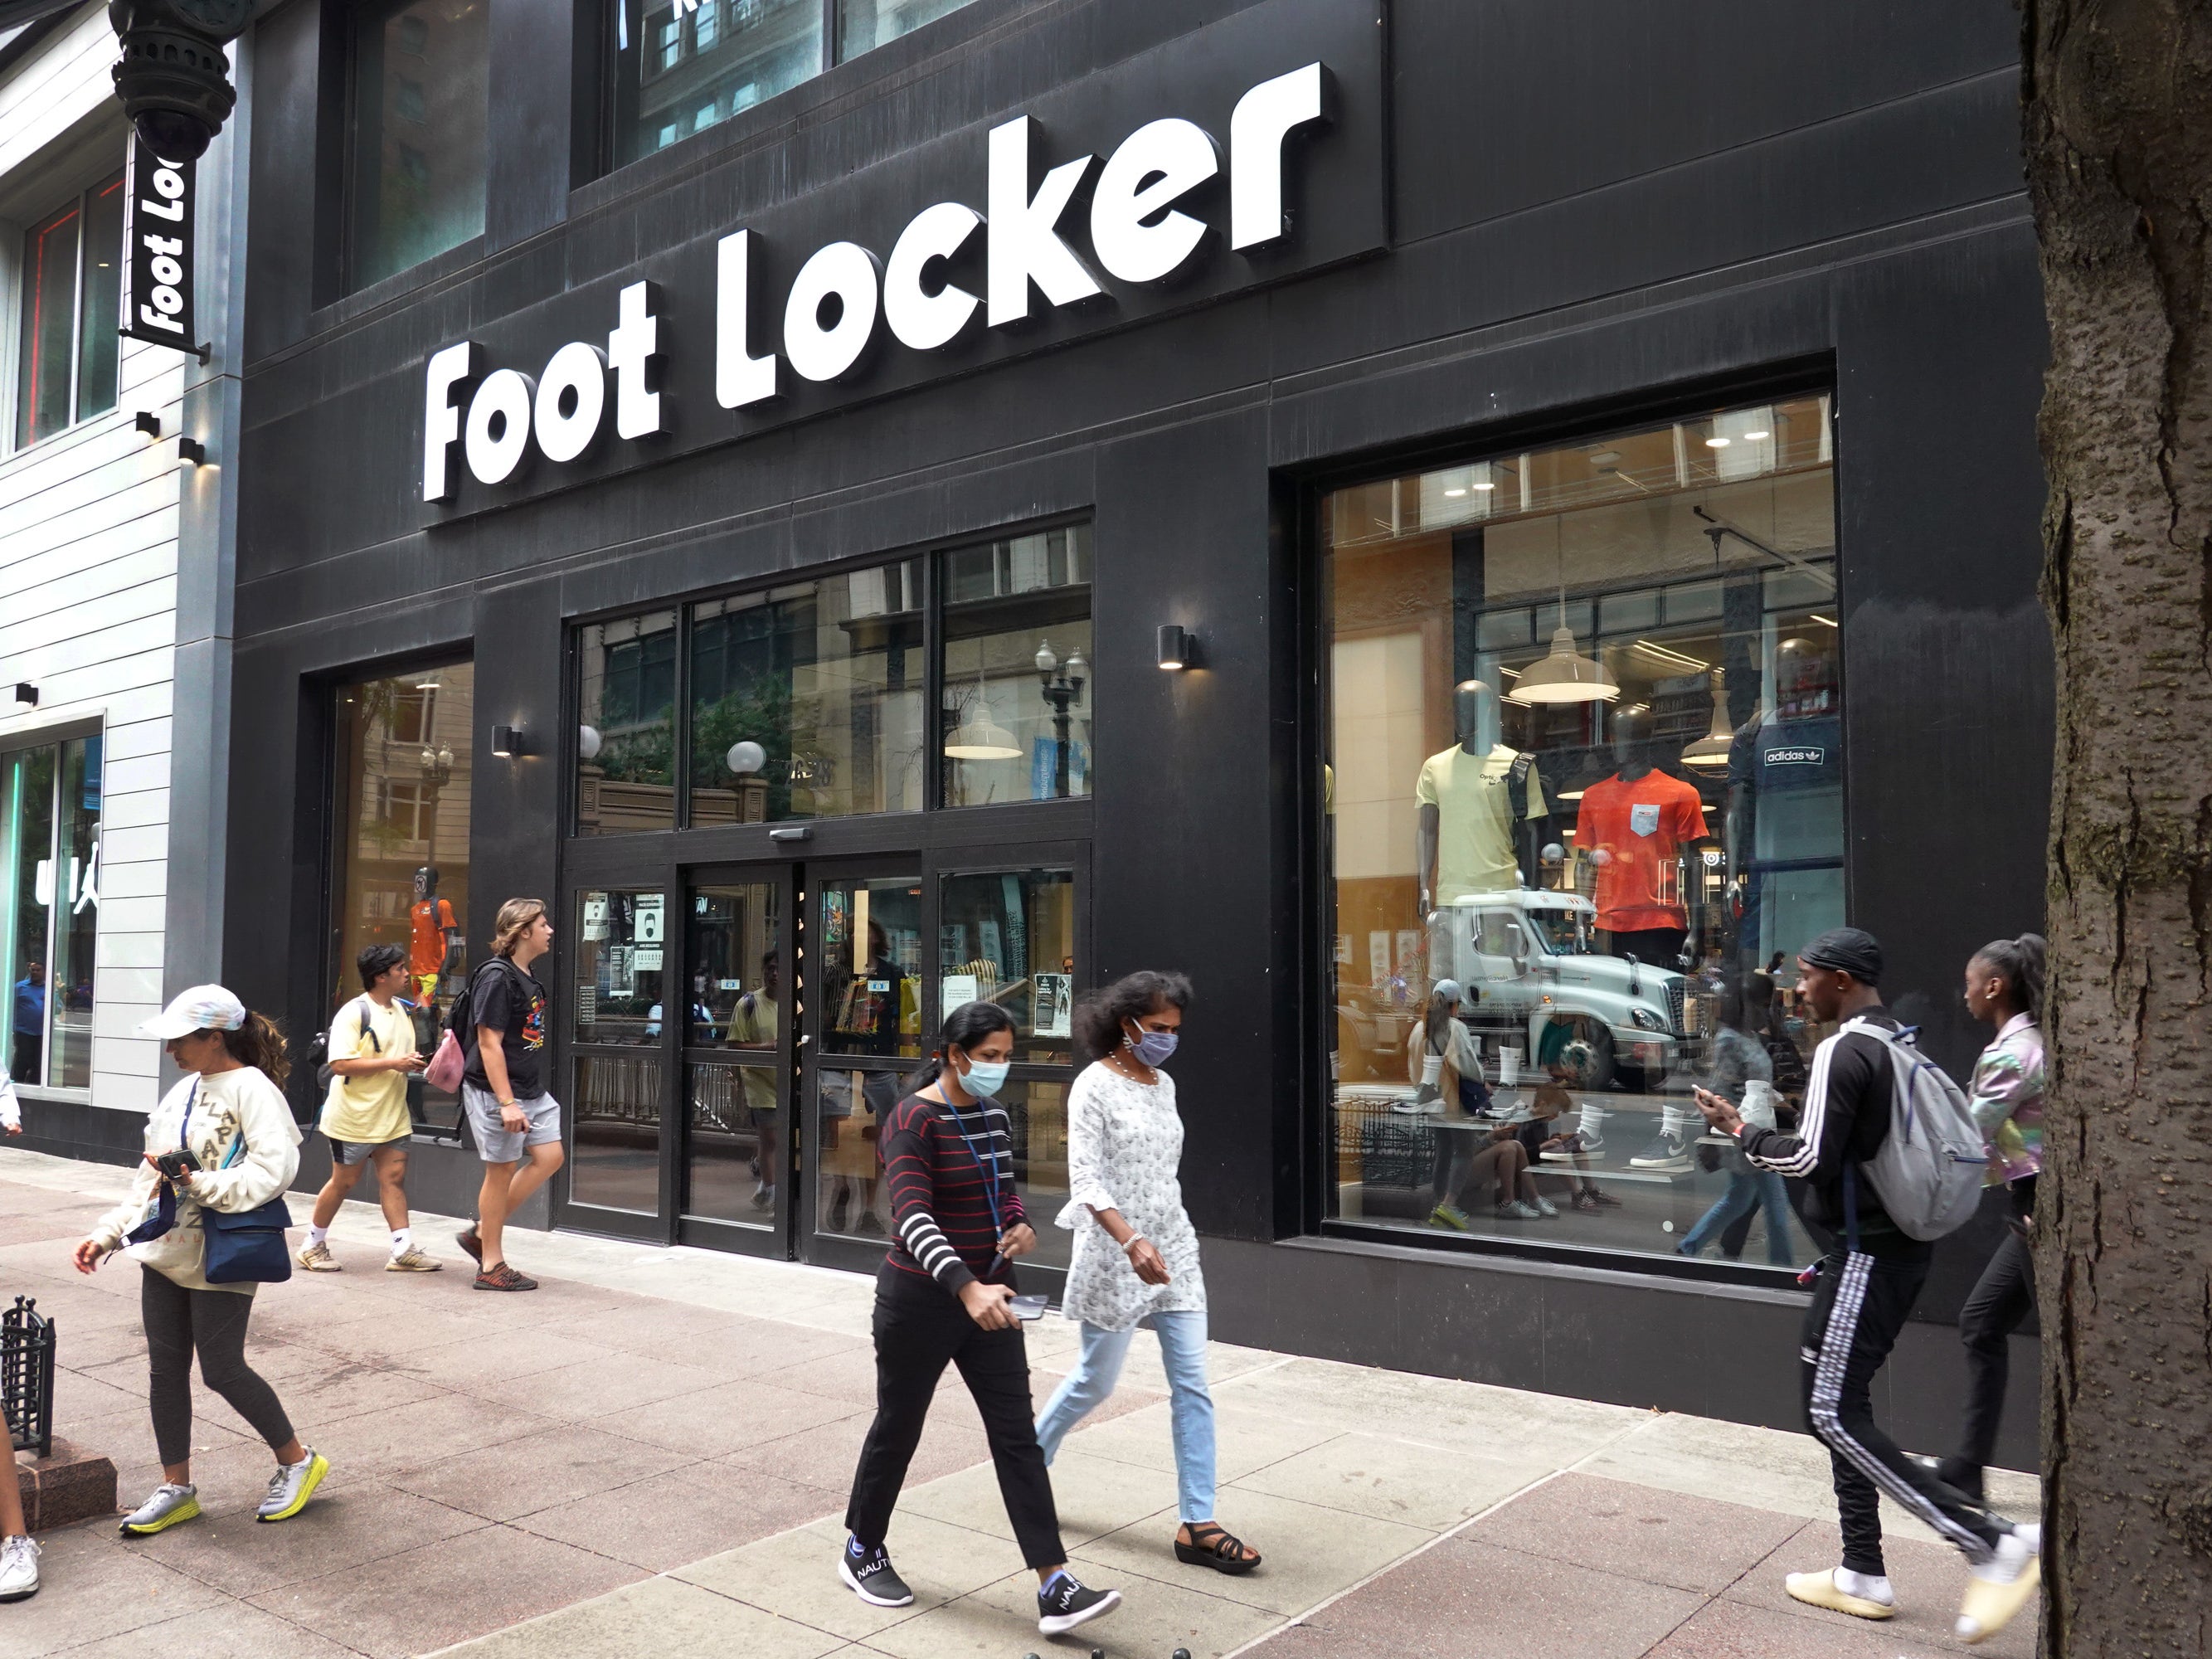 Buying EVERY Footlocker Employee A Pair Of Shoes! 